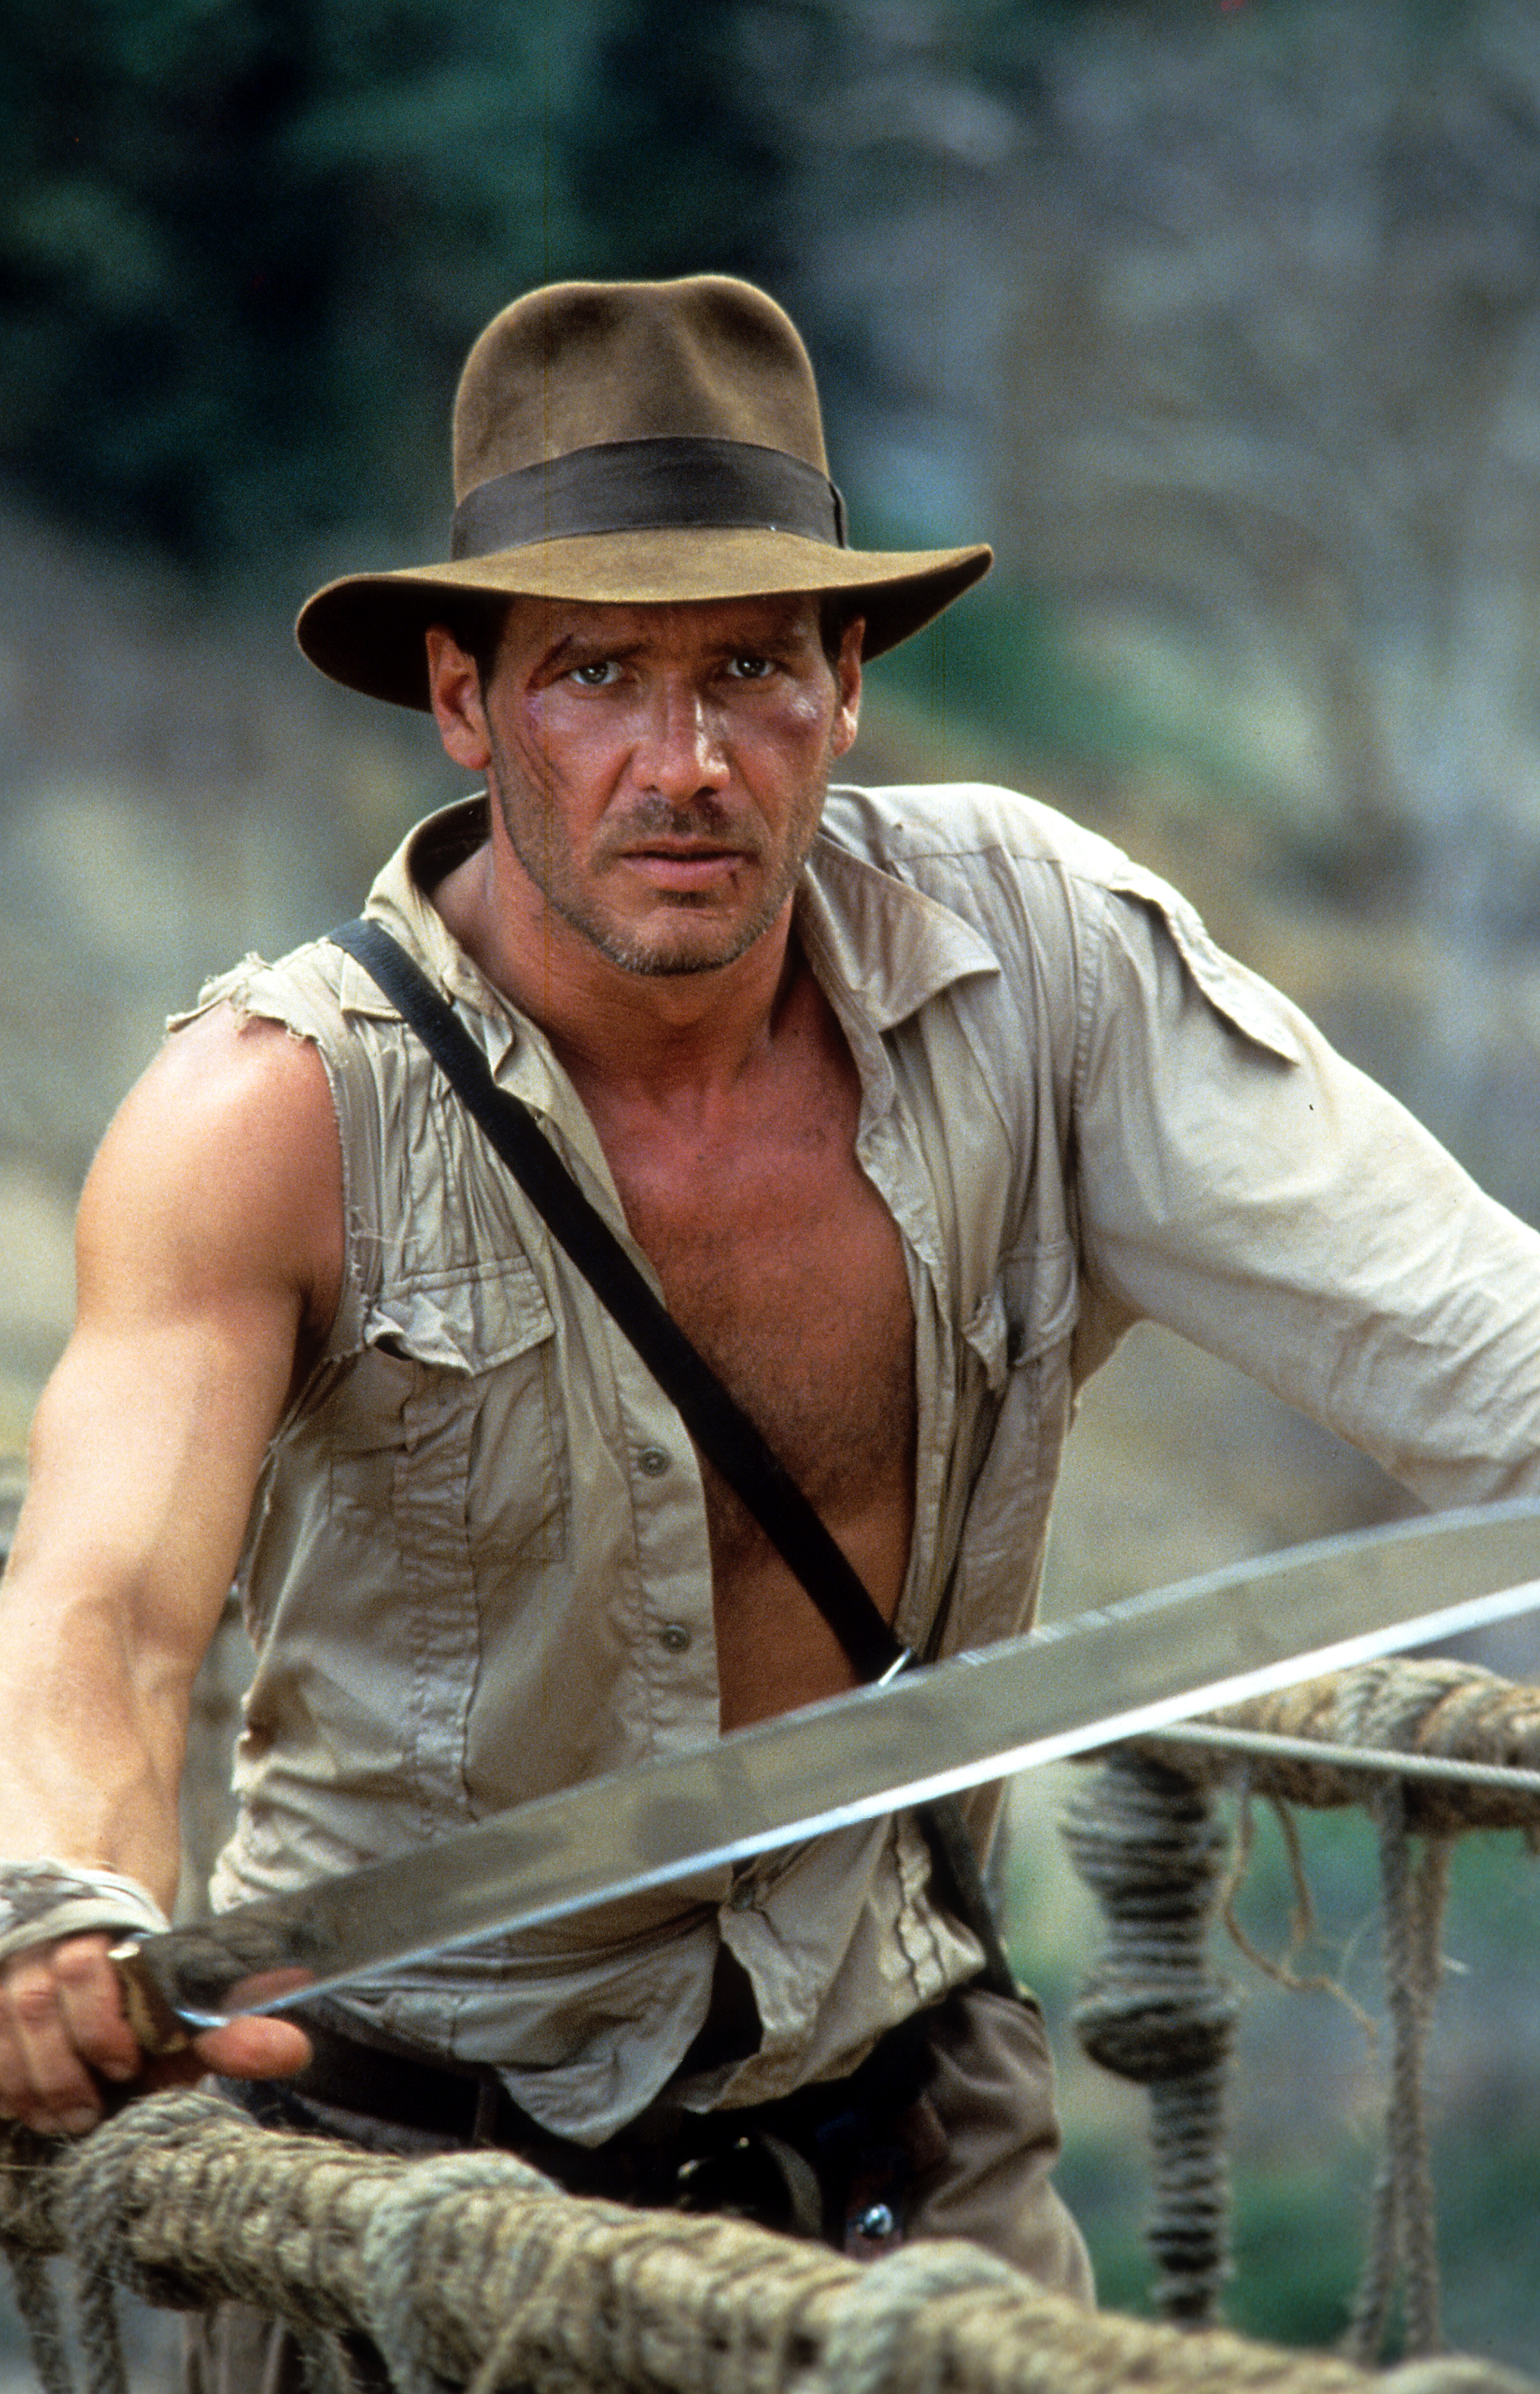 Harrison Ford | Source: Getty Images